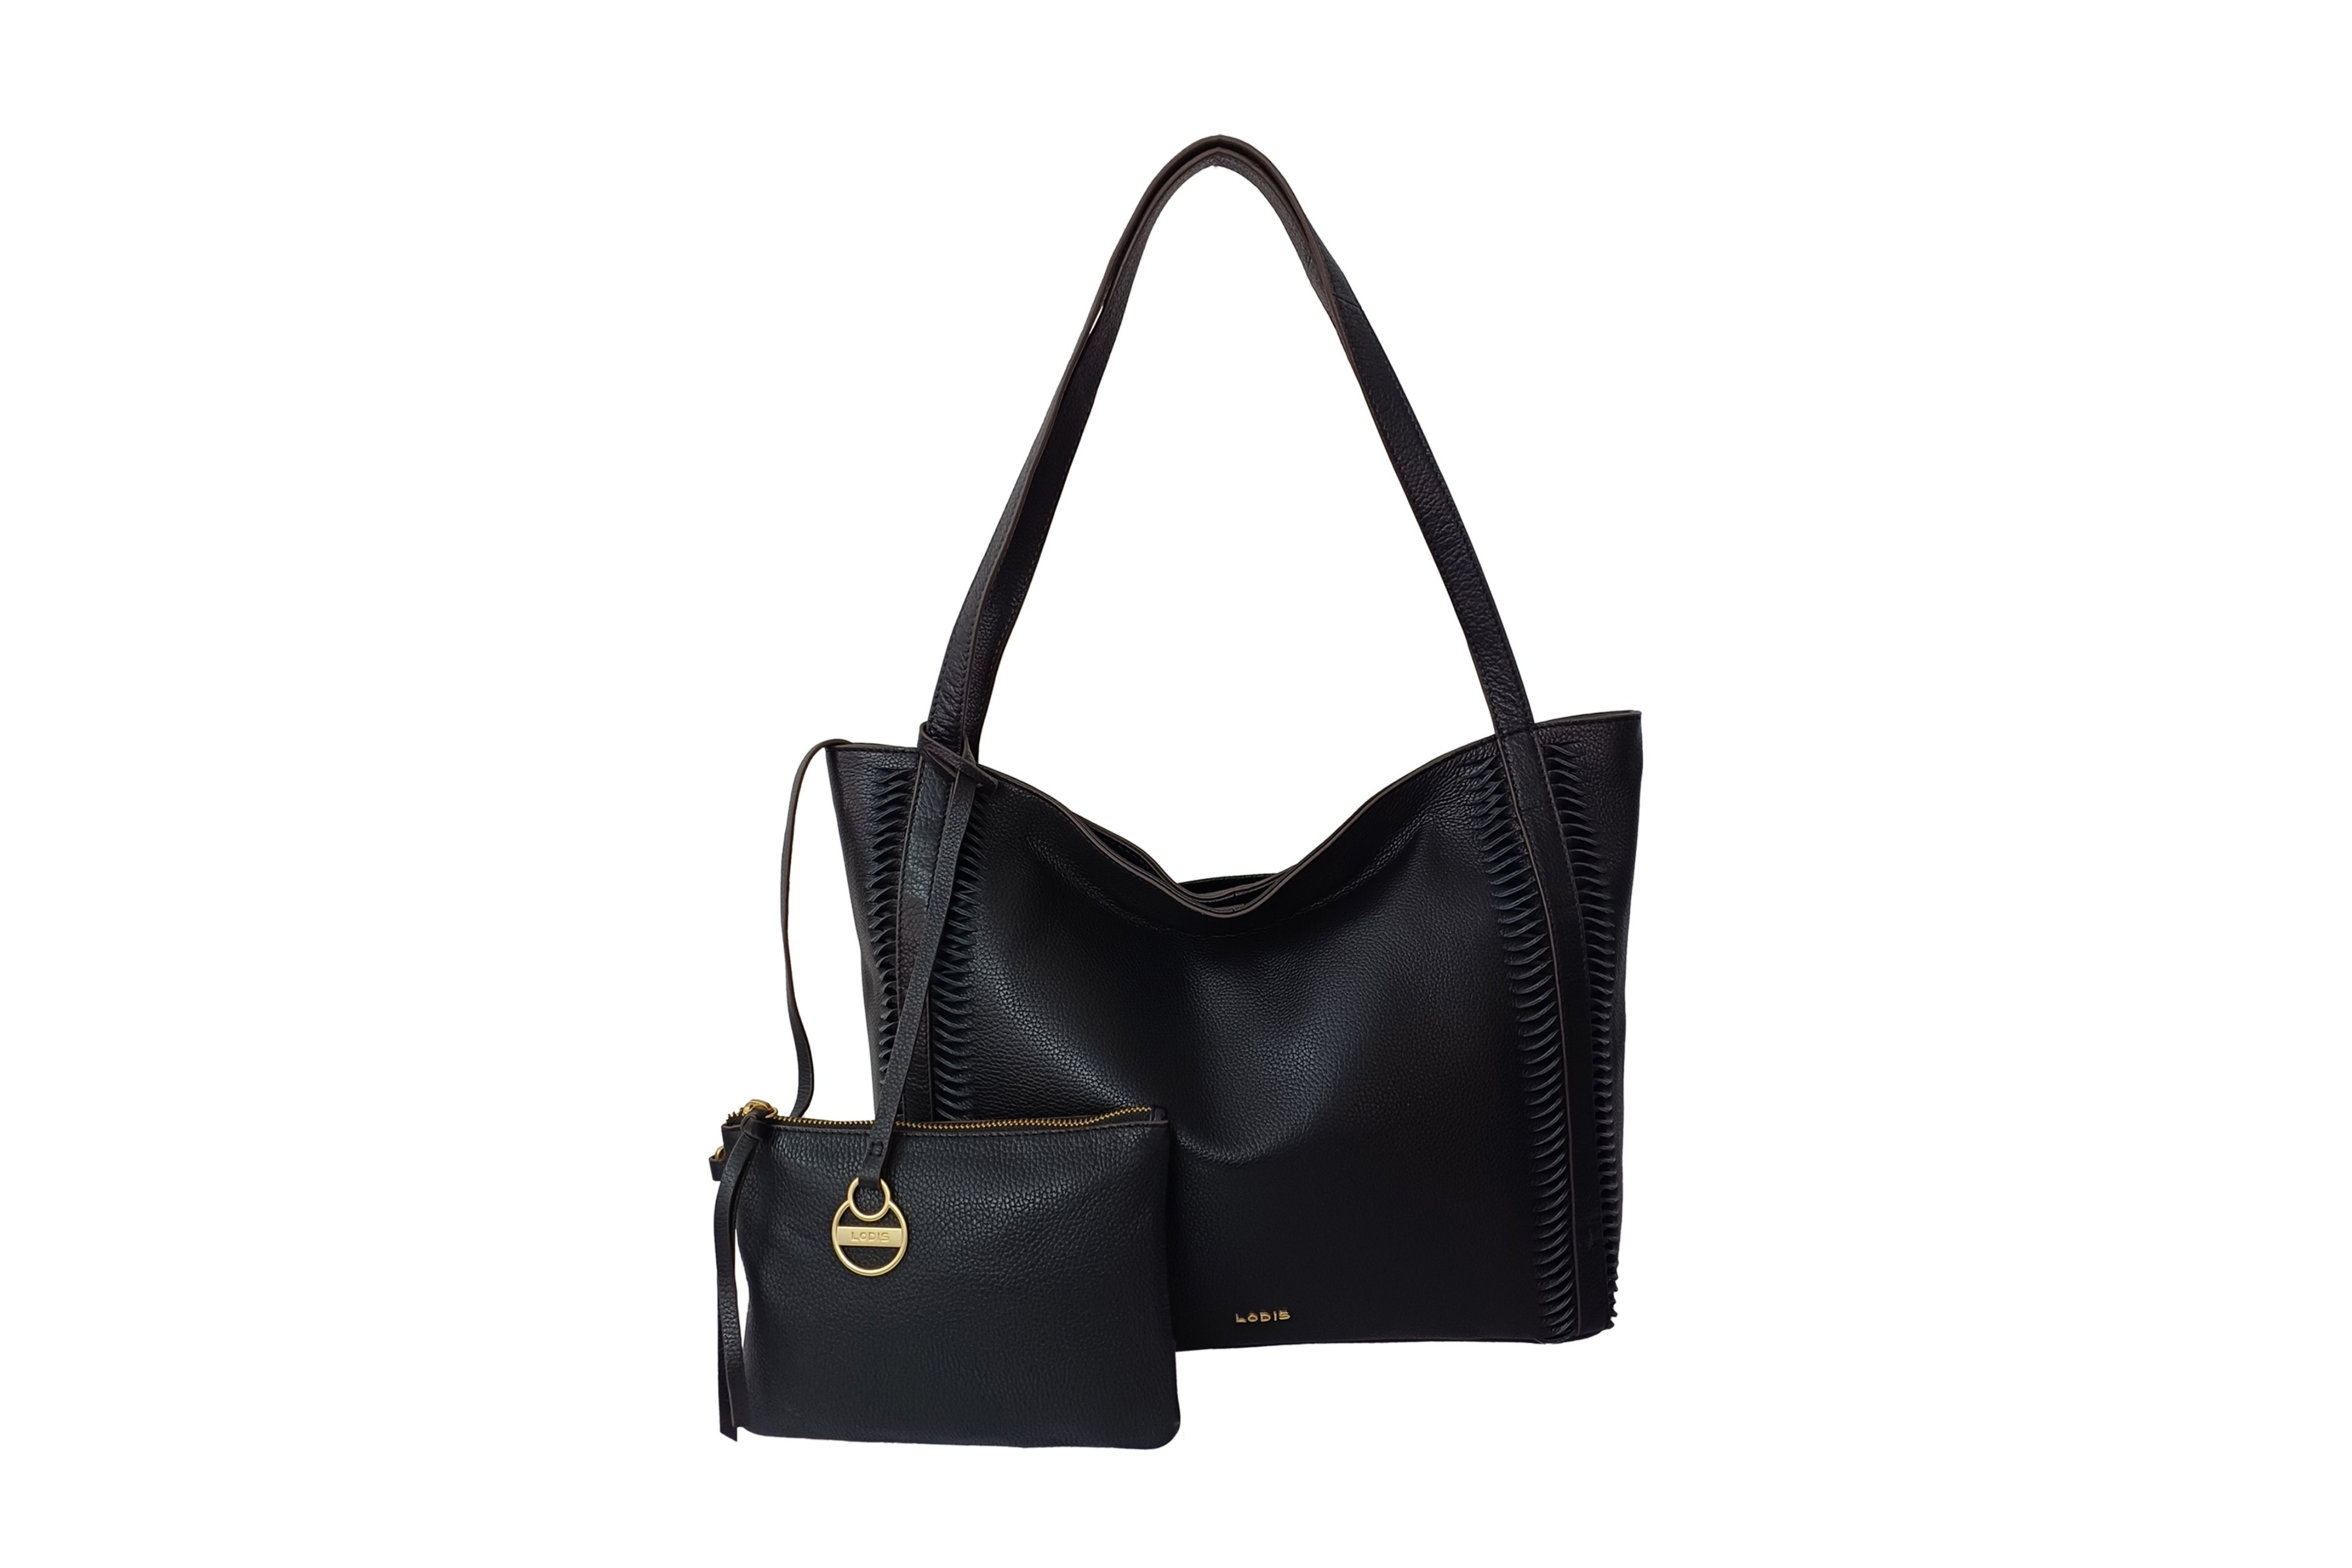 Shop the Erica Tote & Get the Ultimate Tote Upgrade | Lodis